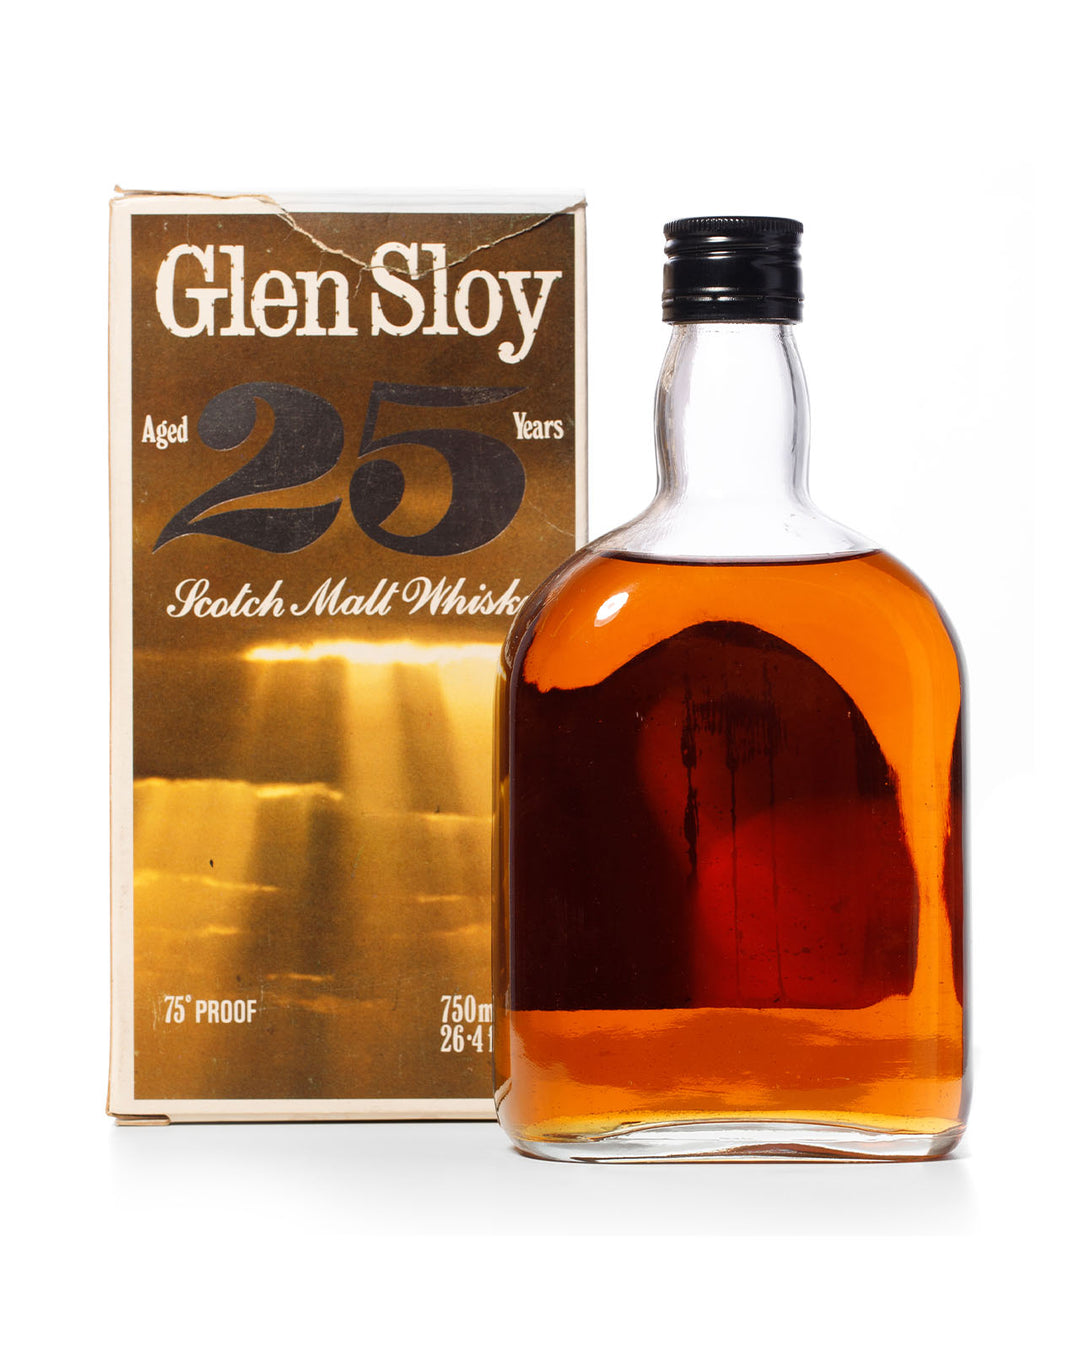 Glen Sloy 1970's 25 Year Old 75 Proof With Original Box